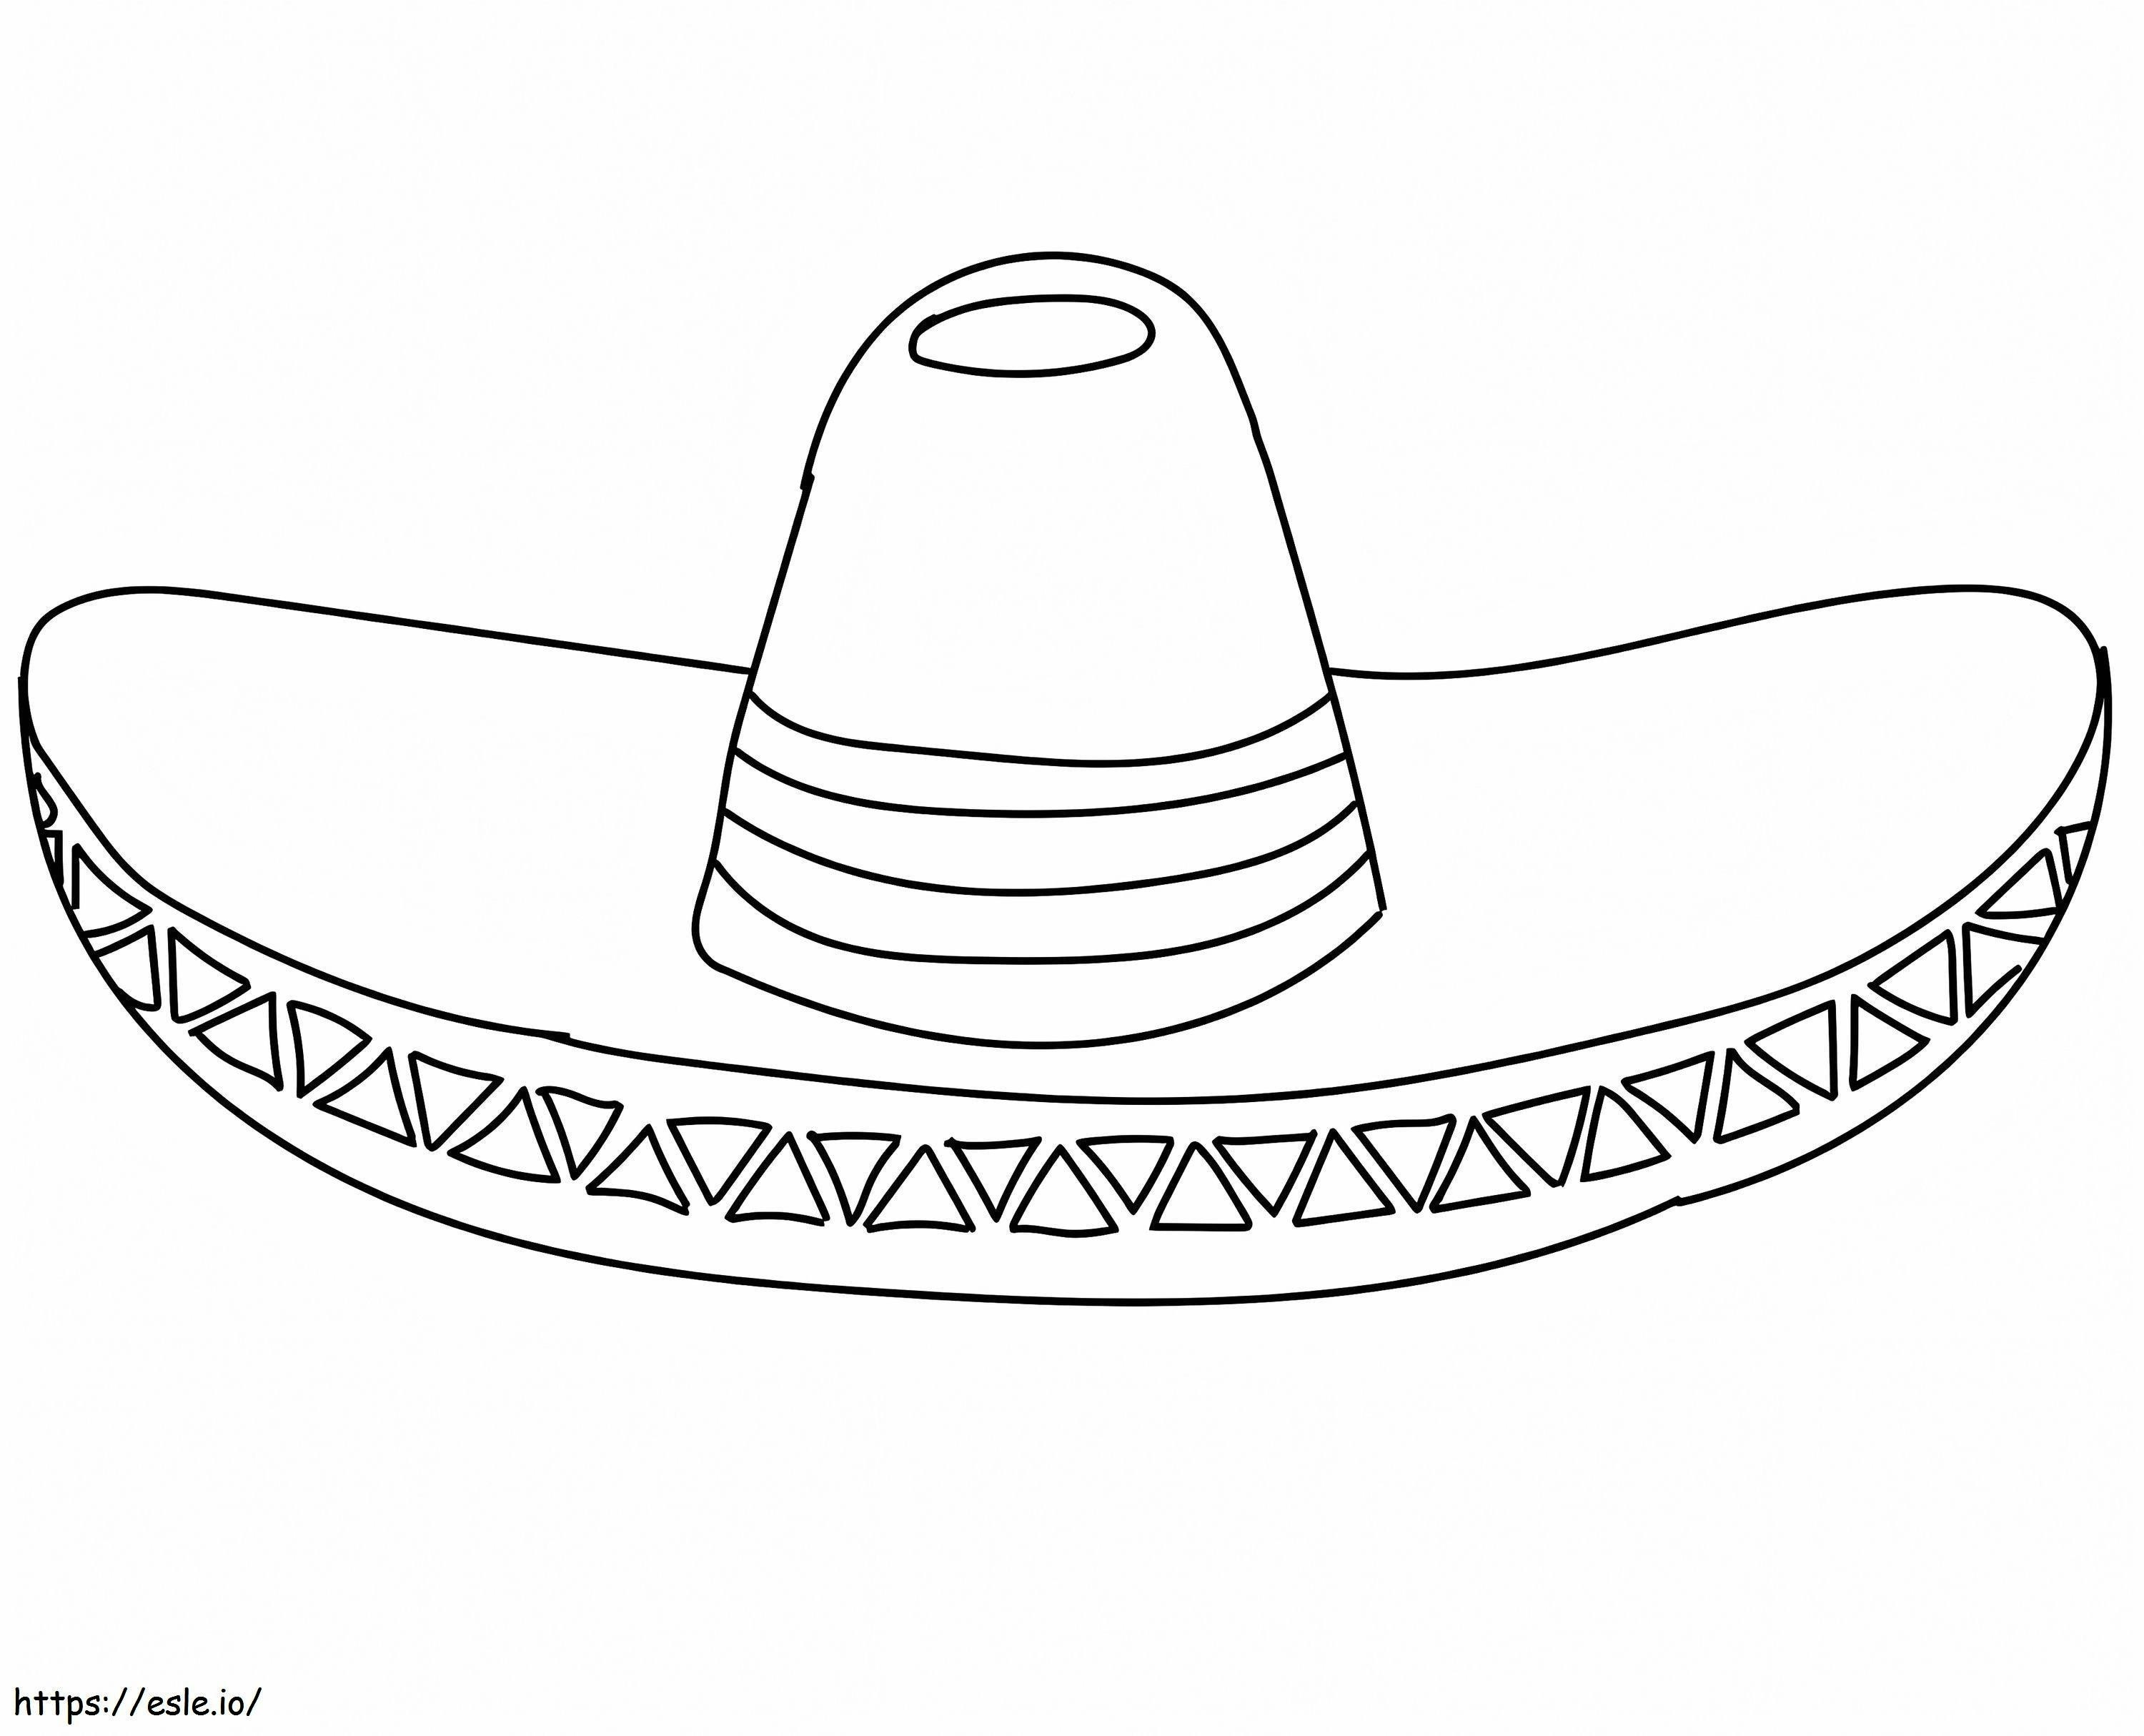 Amazing Hat coloring page